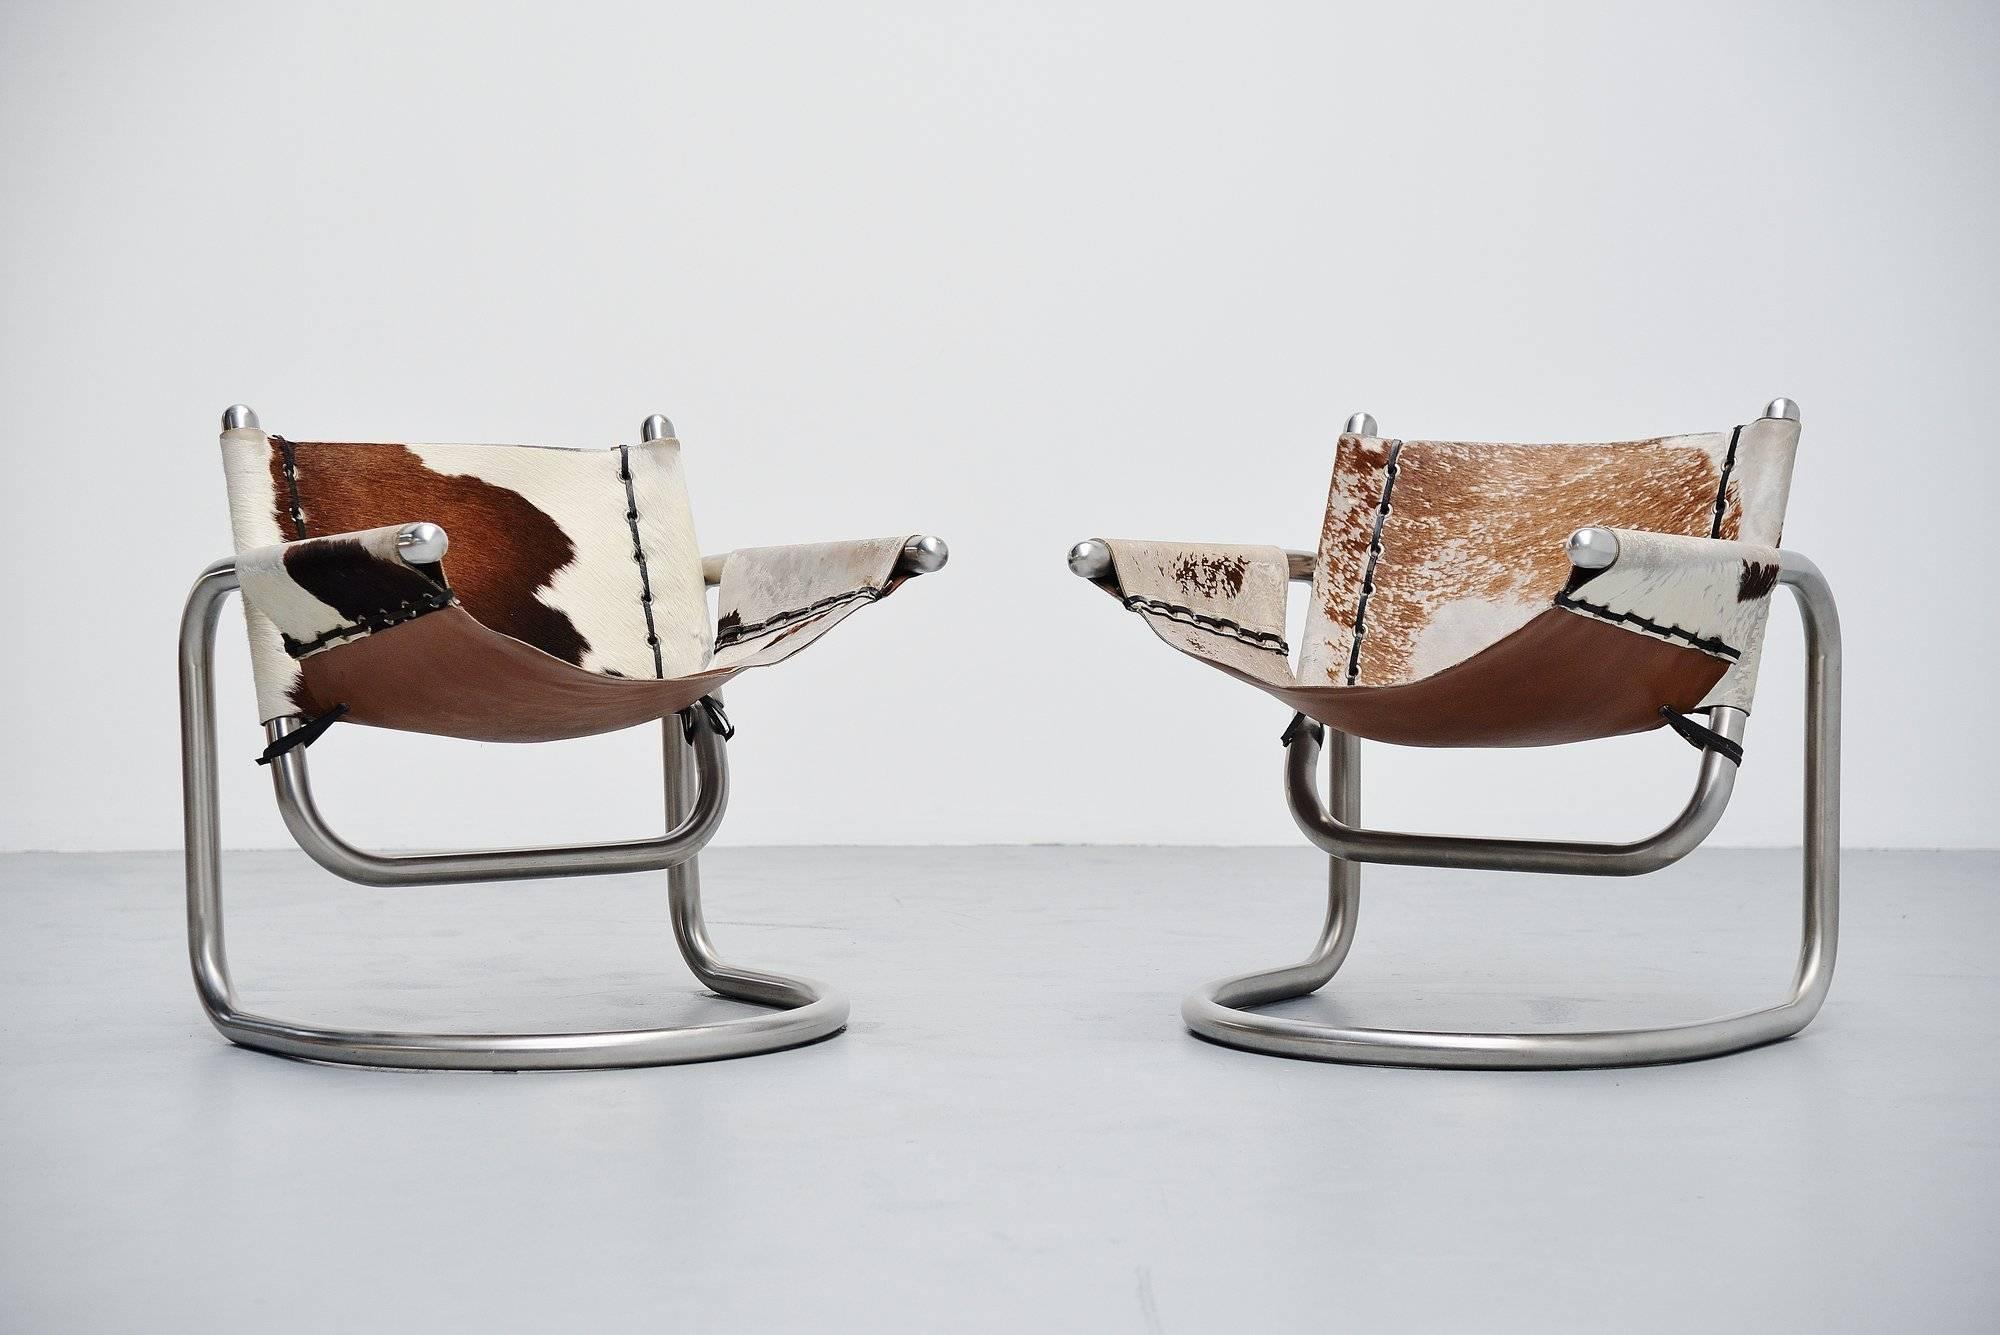 Very nice and unusual pair of lounge chair designed by unknown designer or manufacturer, Italy, 1970. The chairs have a brushed steel tubular metal frame and cow skin upholstered seat with leather laces. The chairs have a very nice and unusual